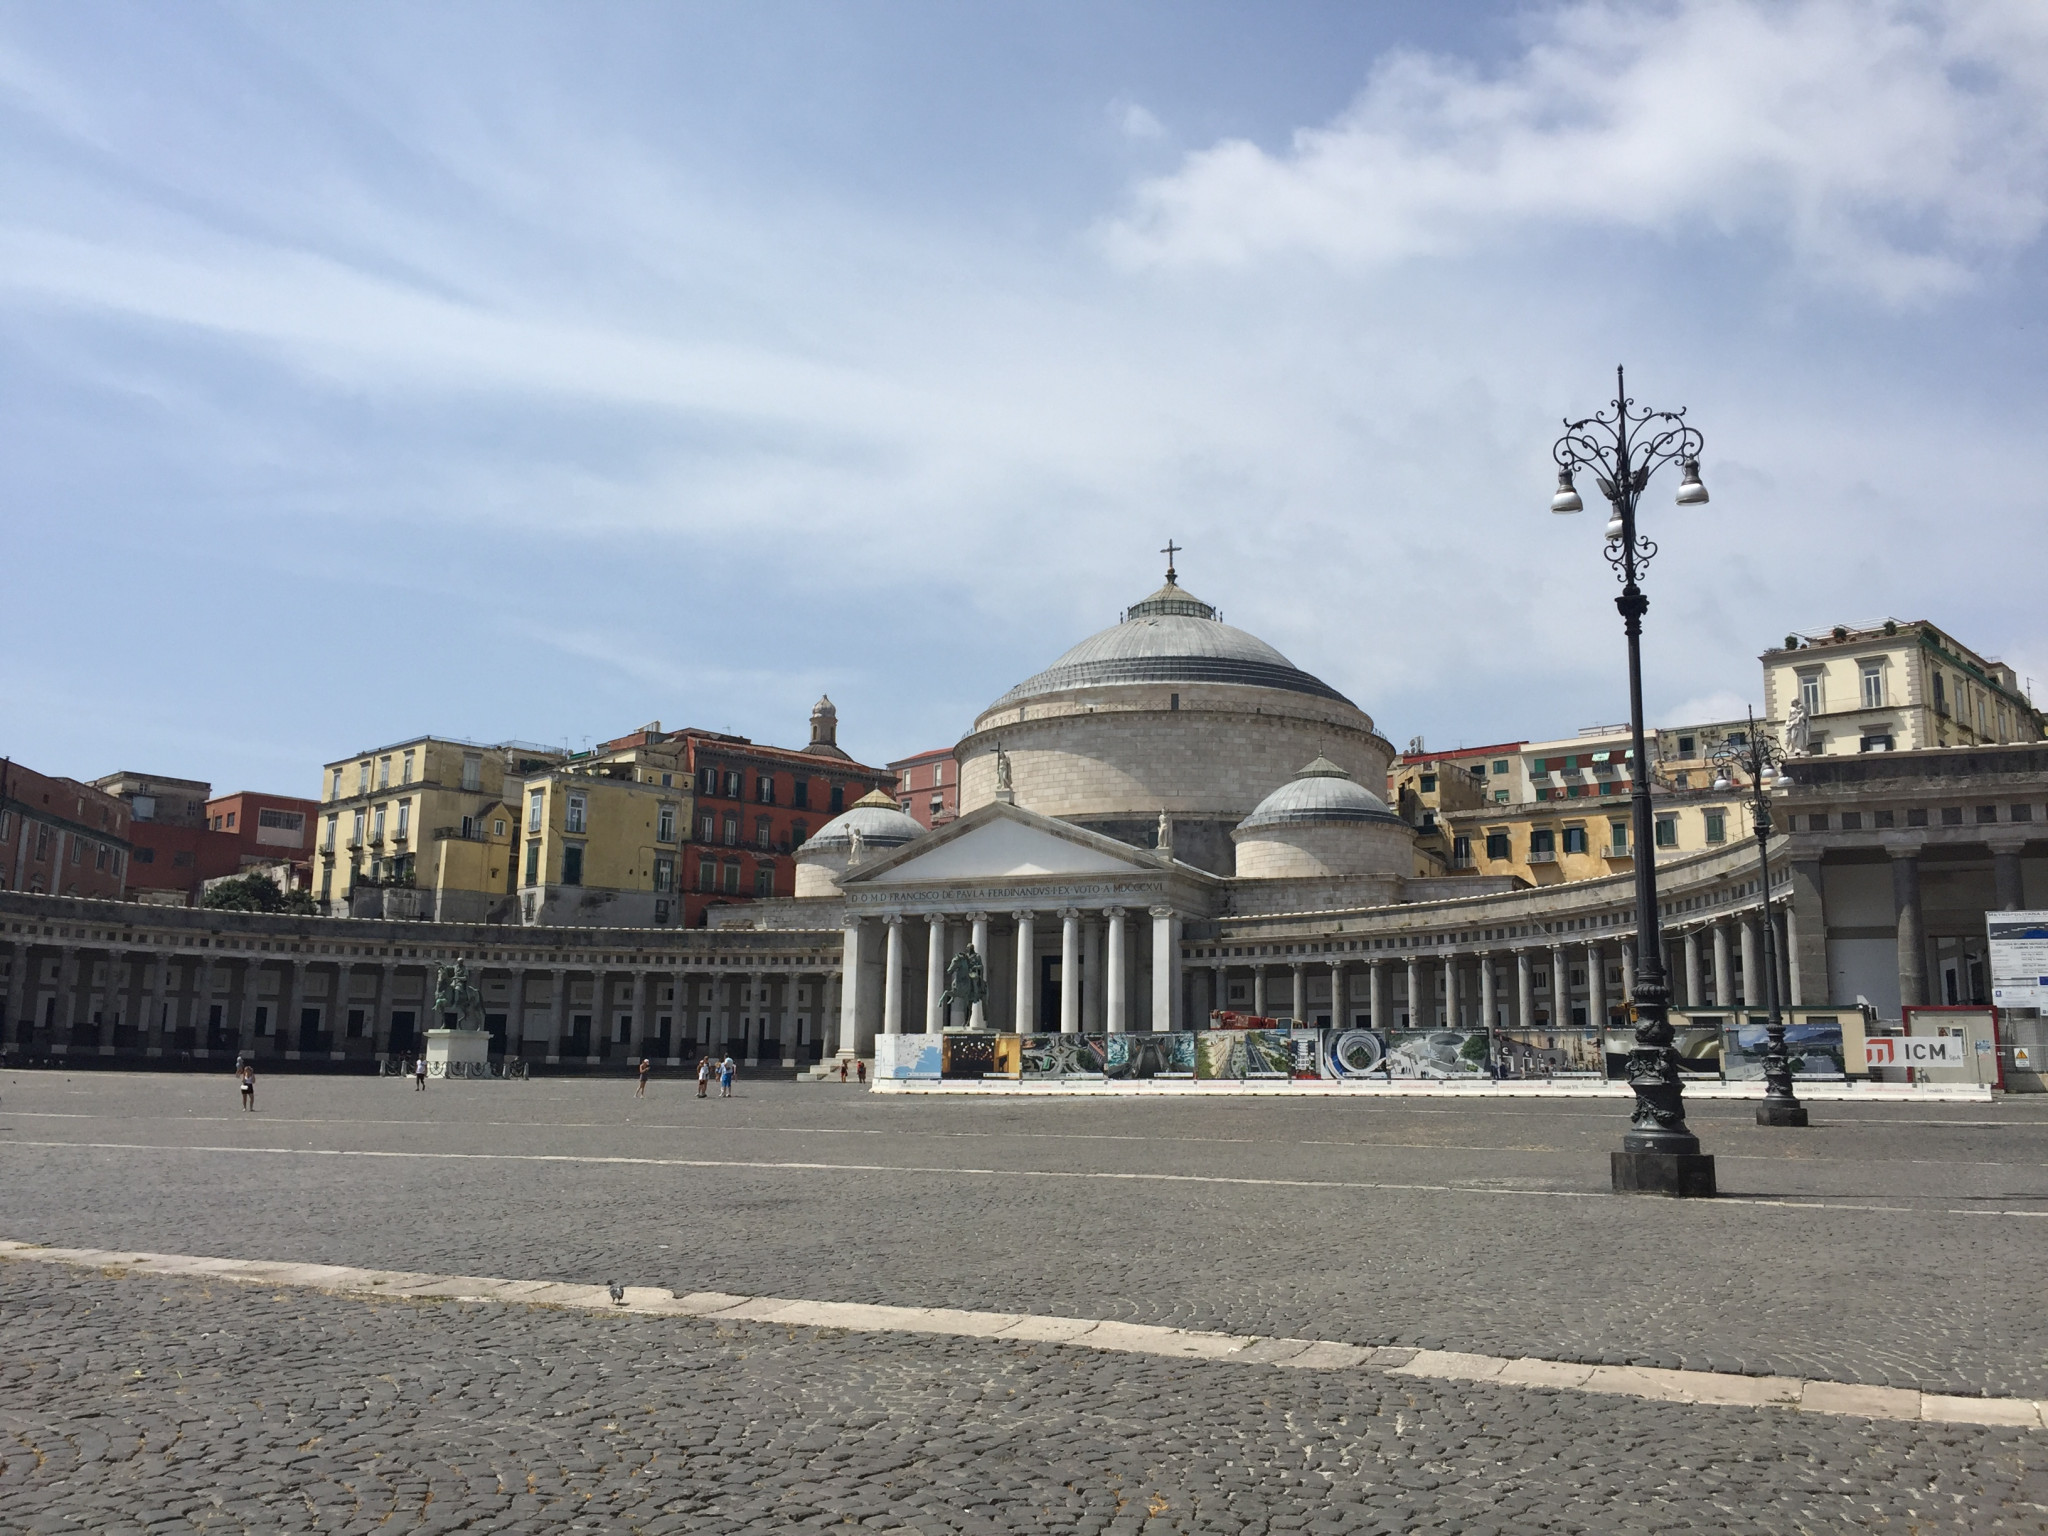 Piazza del Plebiscito had been scheduled to host the Summer Universiade's Closing Ceremony ©ITG